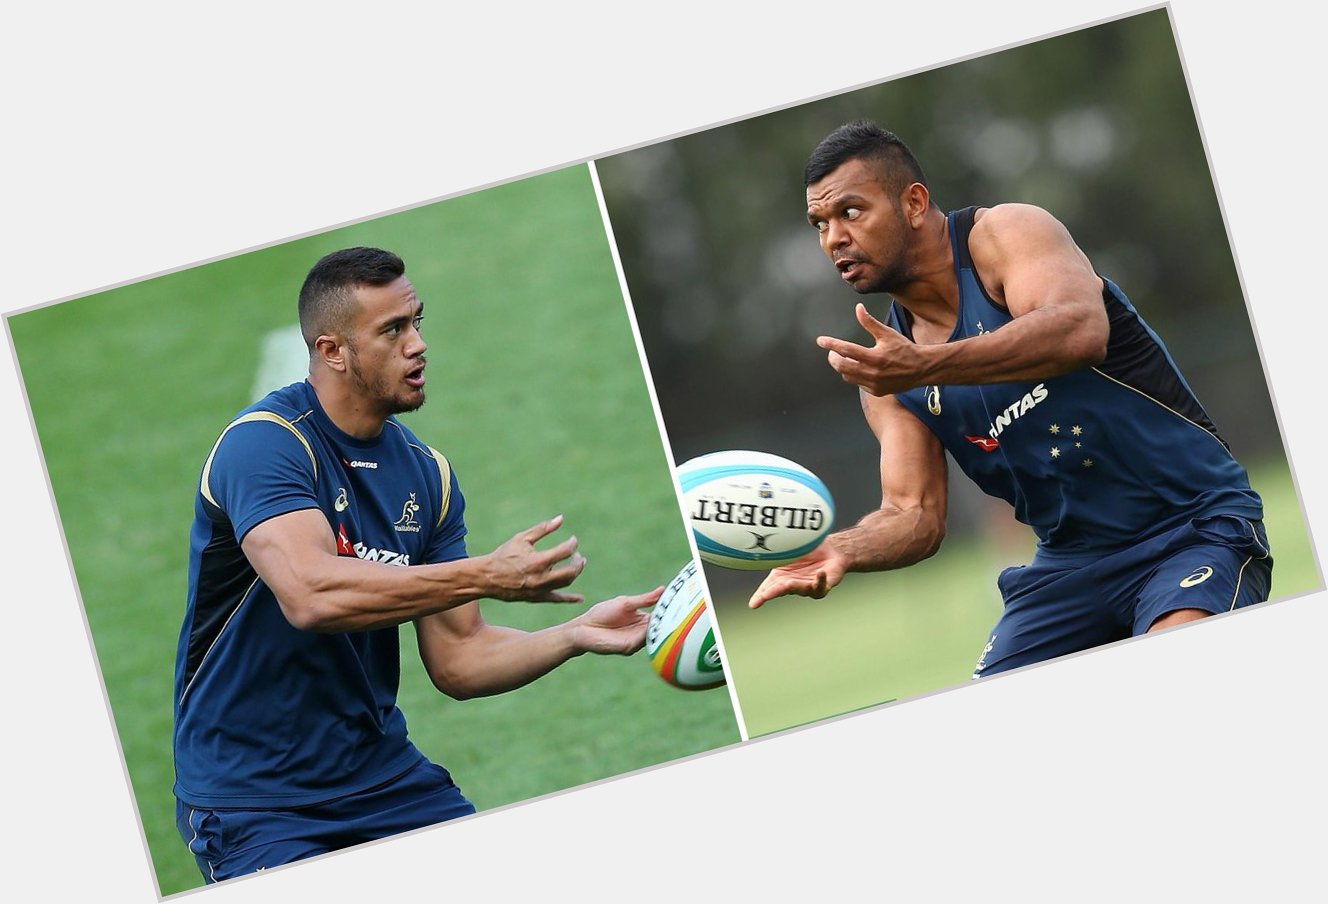 Happy Birthday to players Wallaby no.836 & Wallaby no.878 - have a great day! 